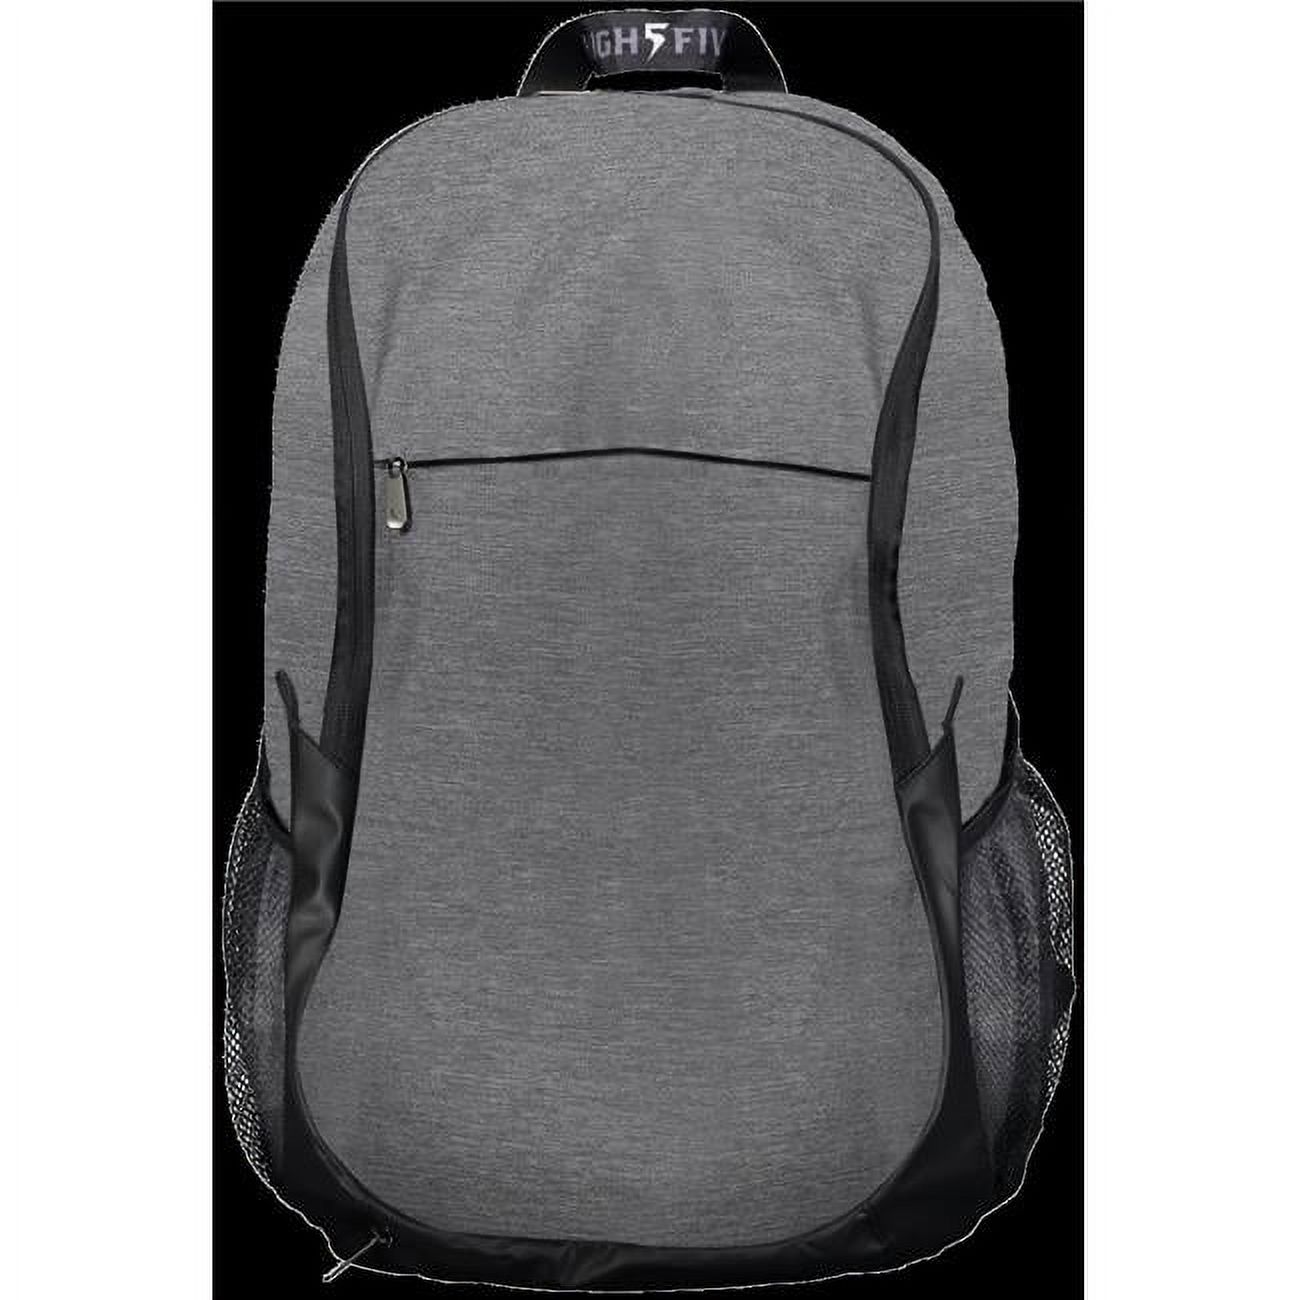 High Five 327895.E83.OS Free Form Backpack, Carbon Heather - One Size - image 1 of 5